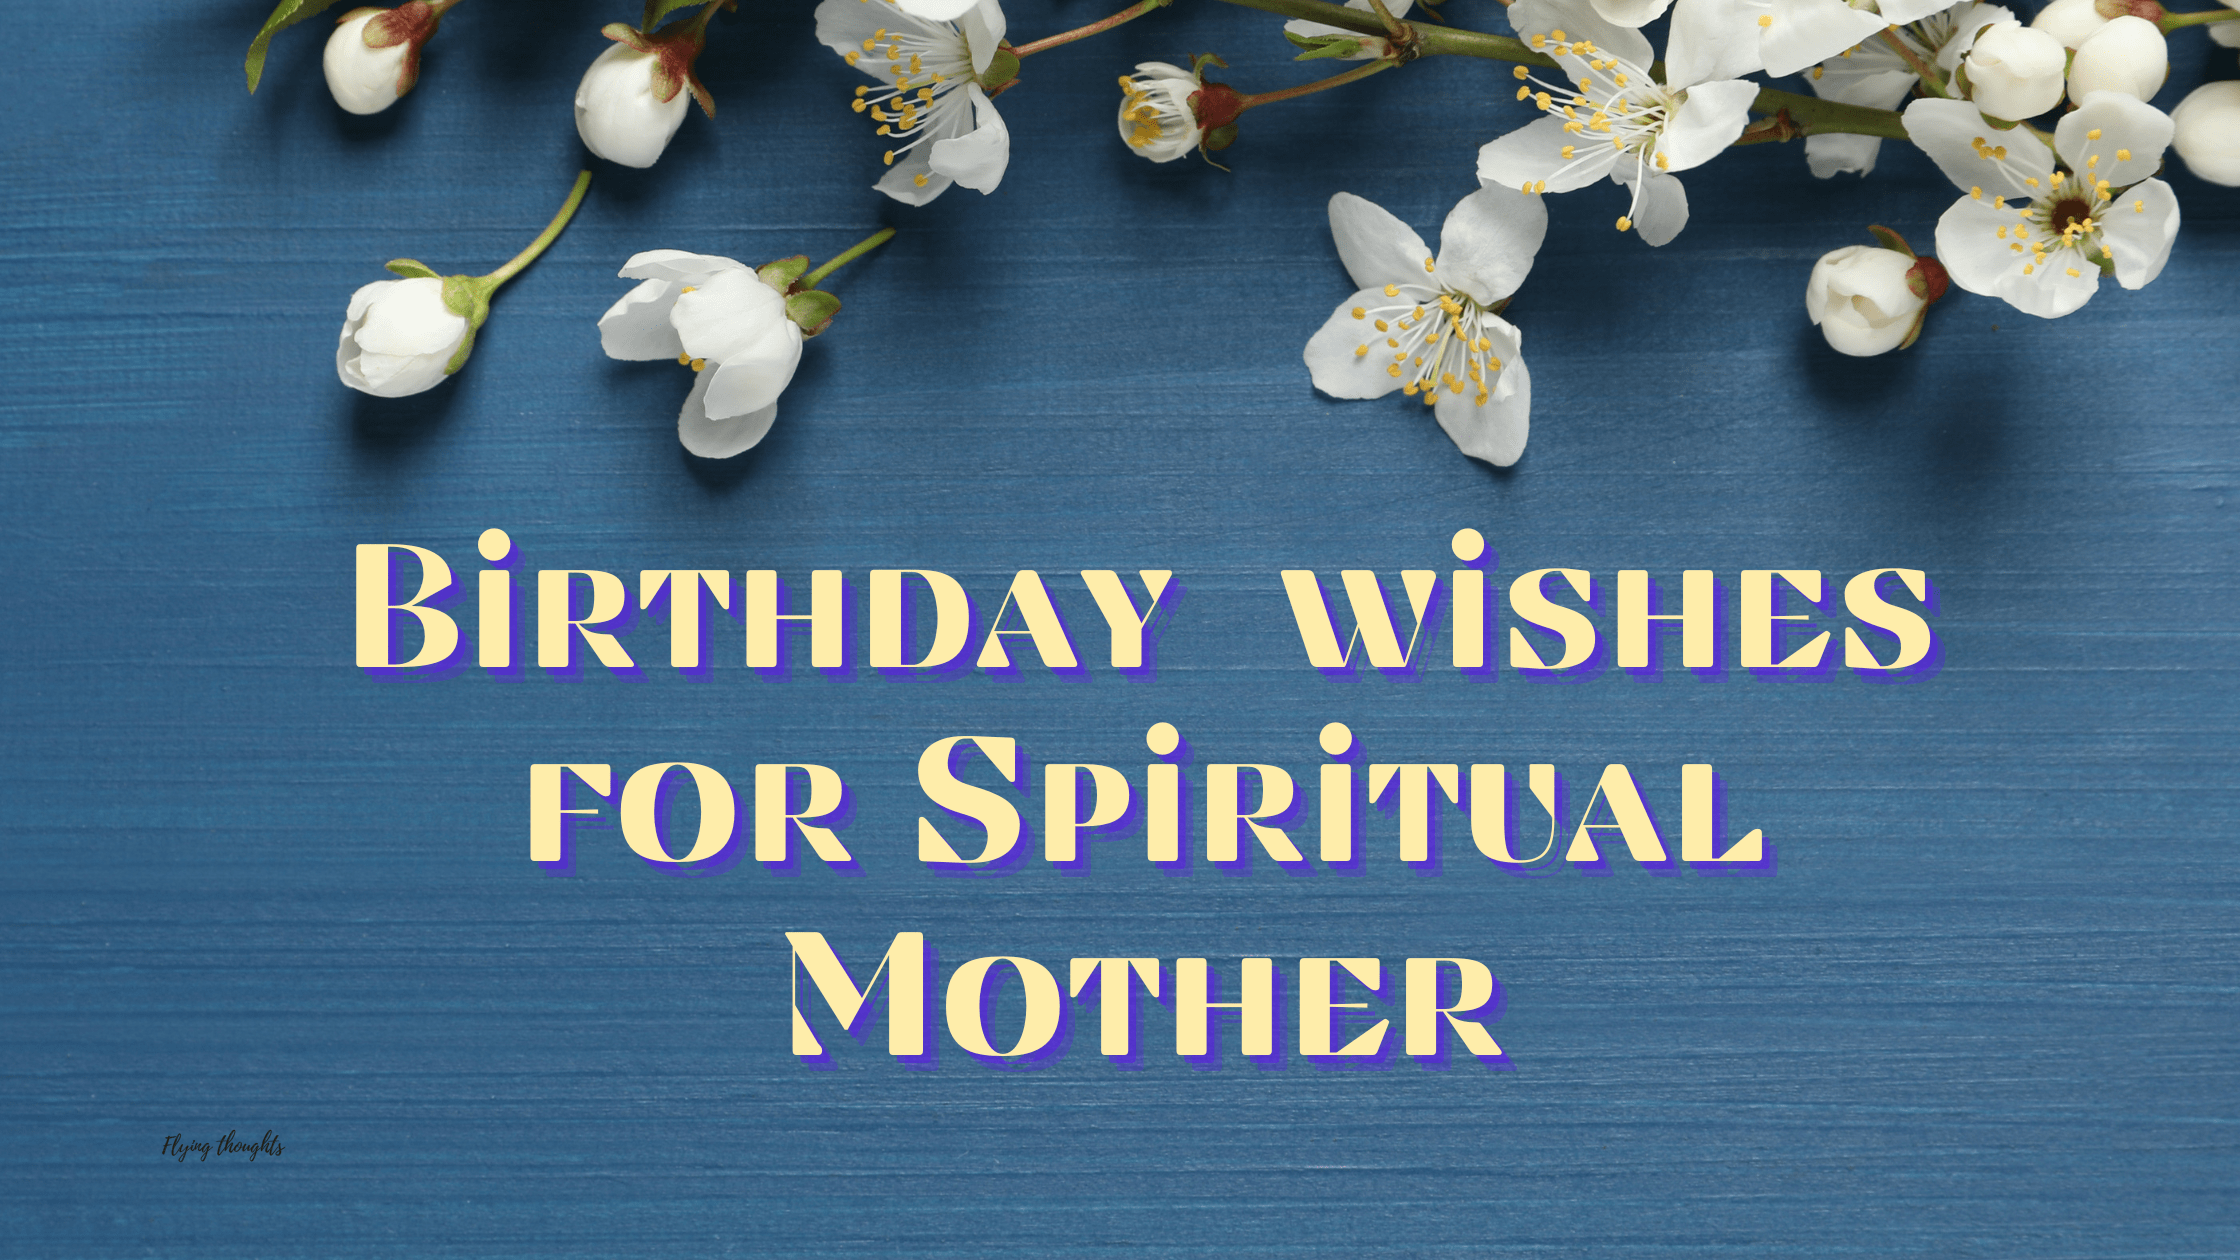 Birthday Wishes for Spiritual Mother That Touch The Heart